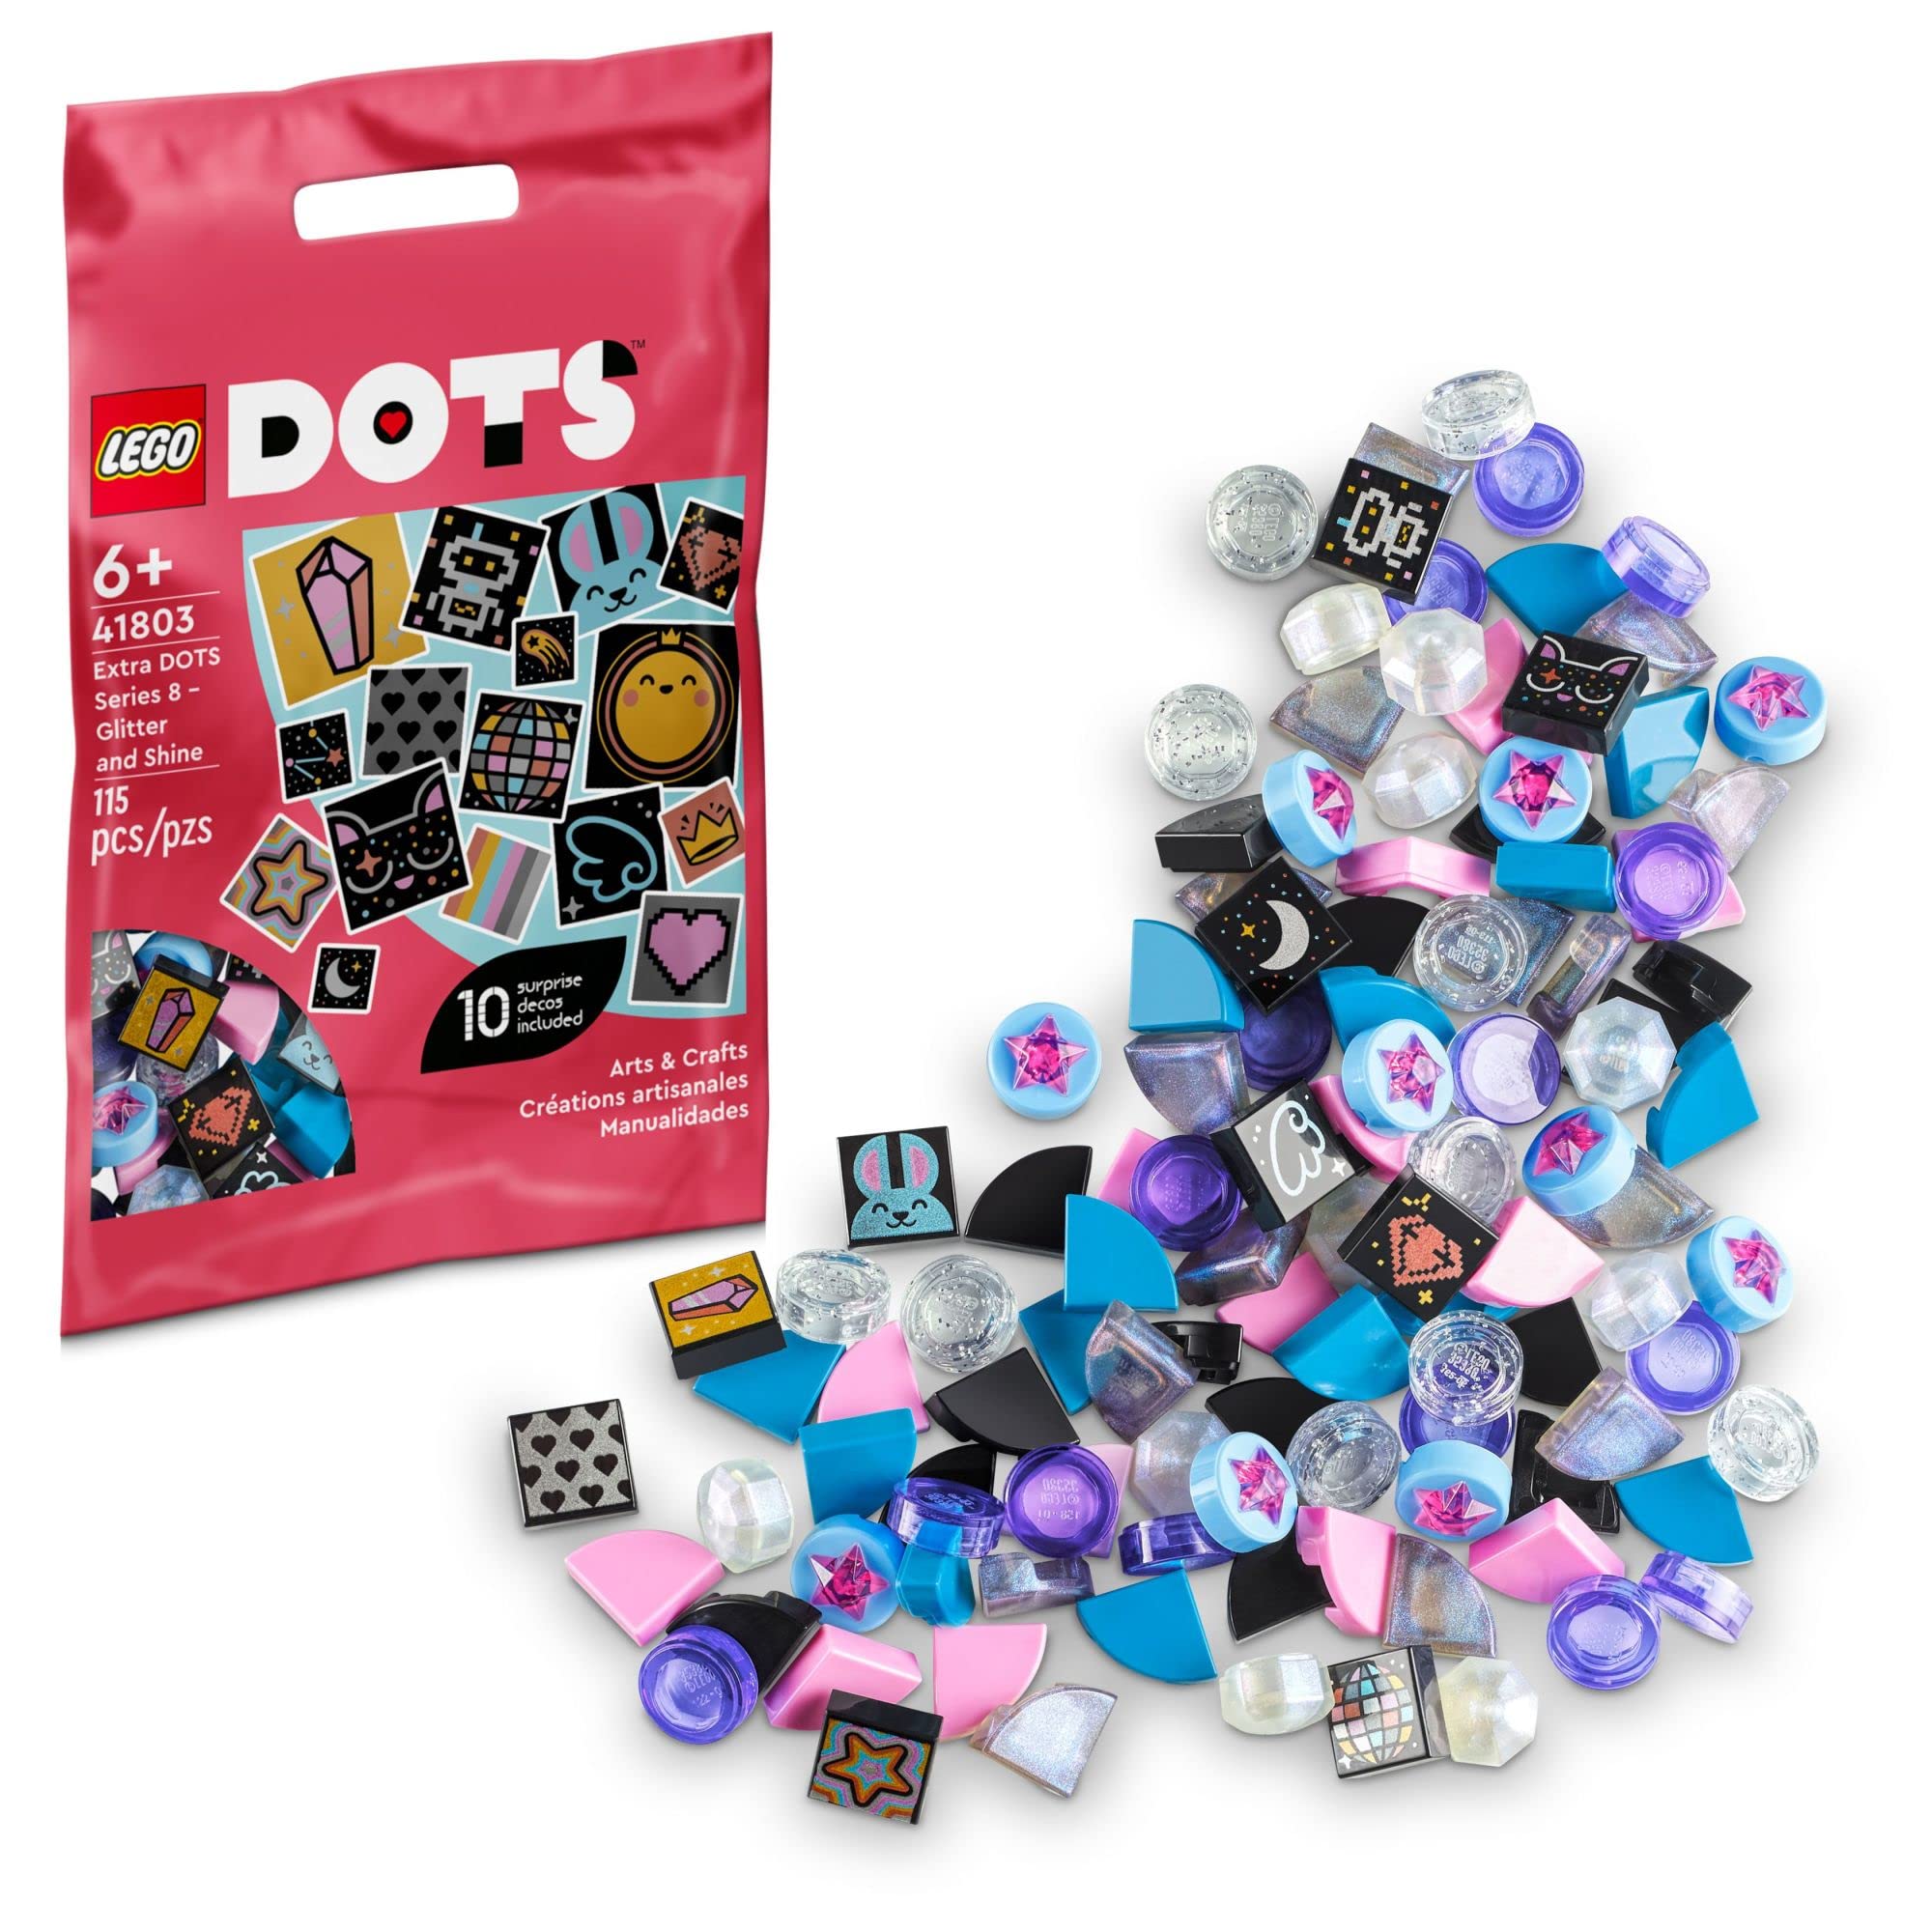 LEGO DOTS Extra DOTS Series 8 Glitter and Shine (41803) $2 + Free Shipping w/ Prime or on $25+